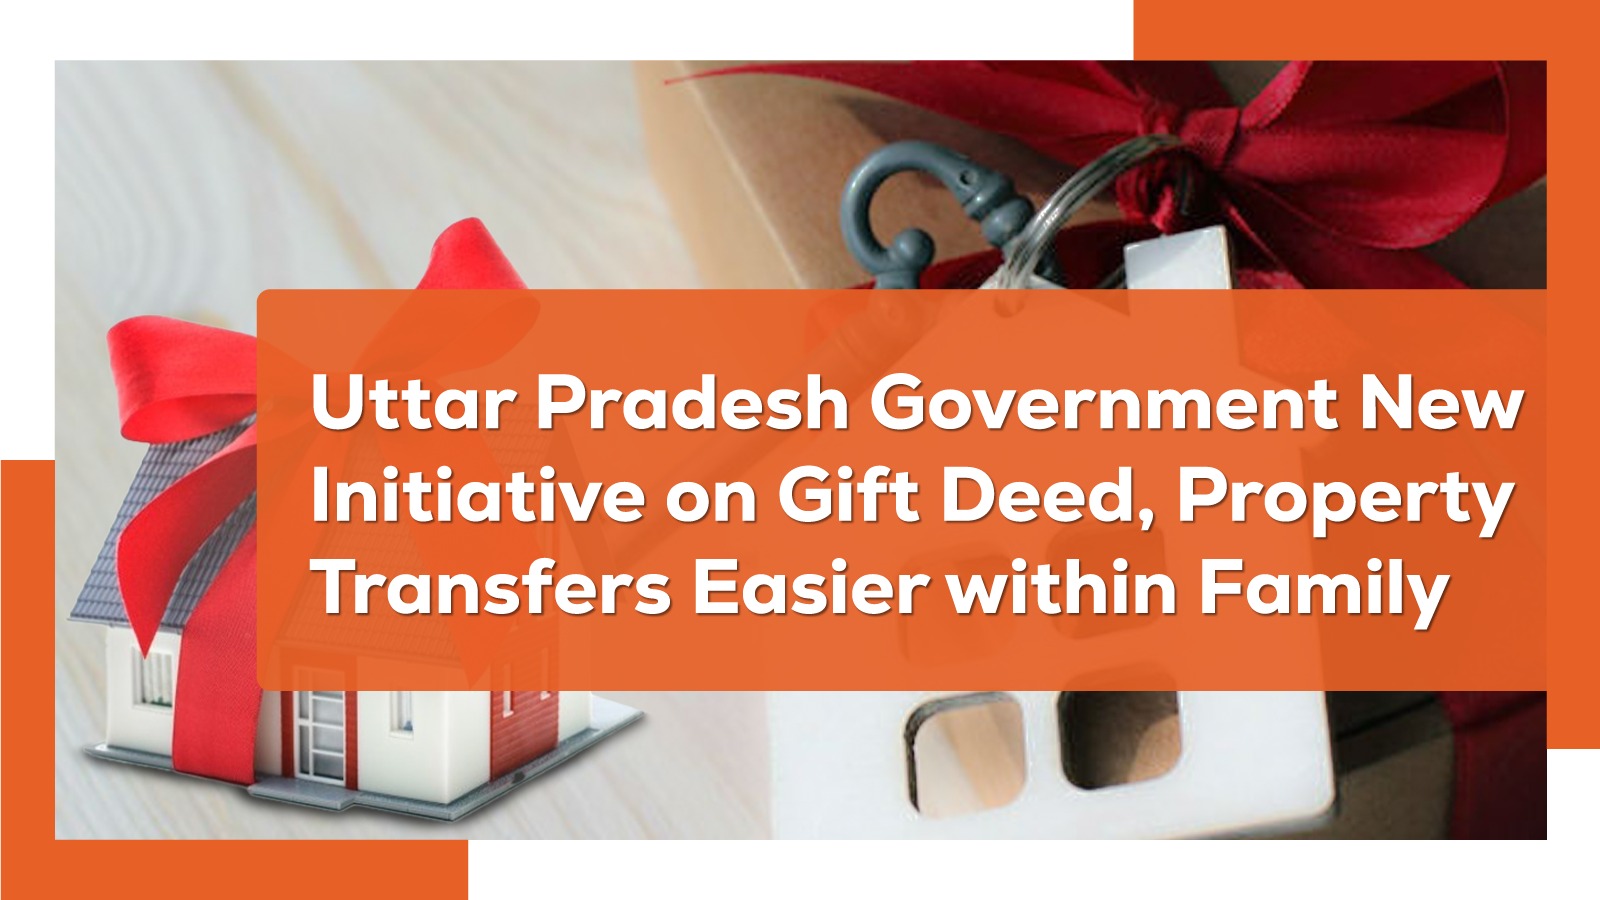 Lawकृति - Gift deed is not a valid gift and can be cancelled,when  possession was not handed over and the gift deed was not acted upon.  (HC,Madras:S. Manjula Vs G. Shoba,dt.14.06.22) lawkriti.com #